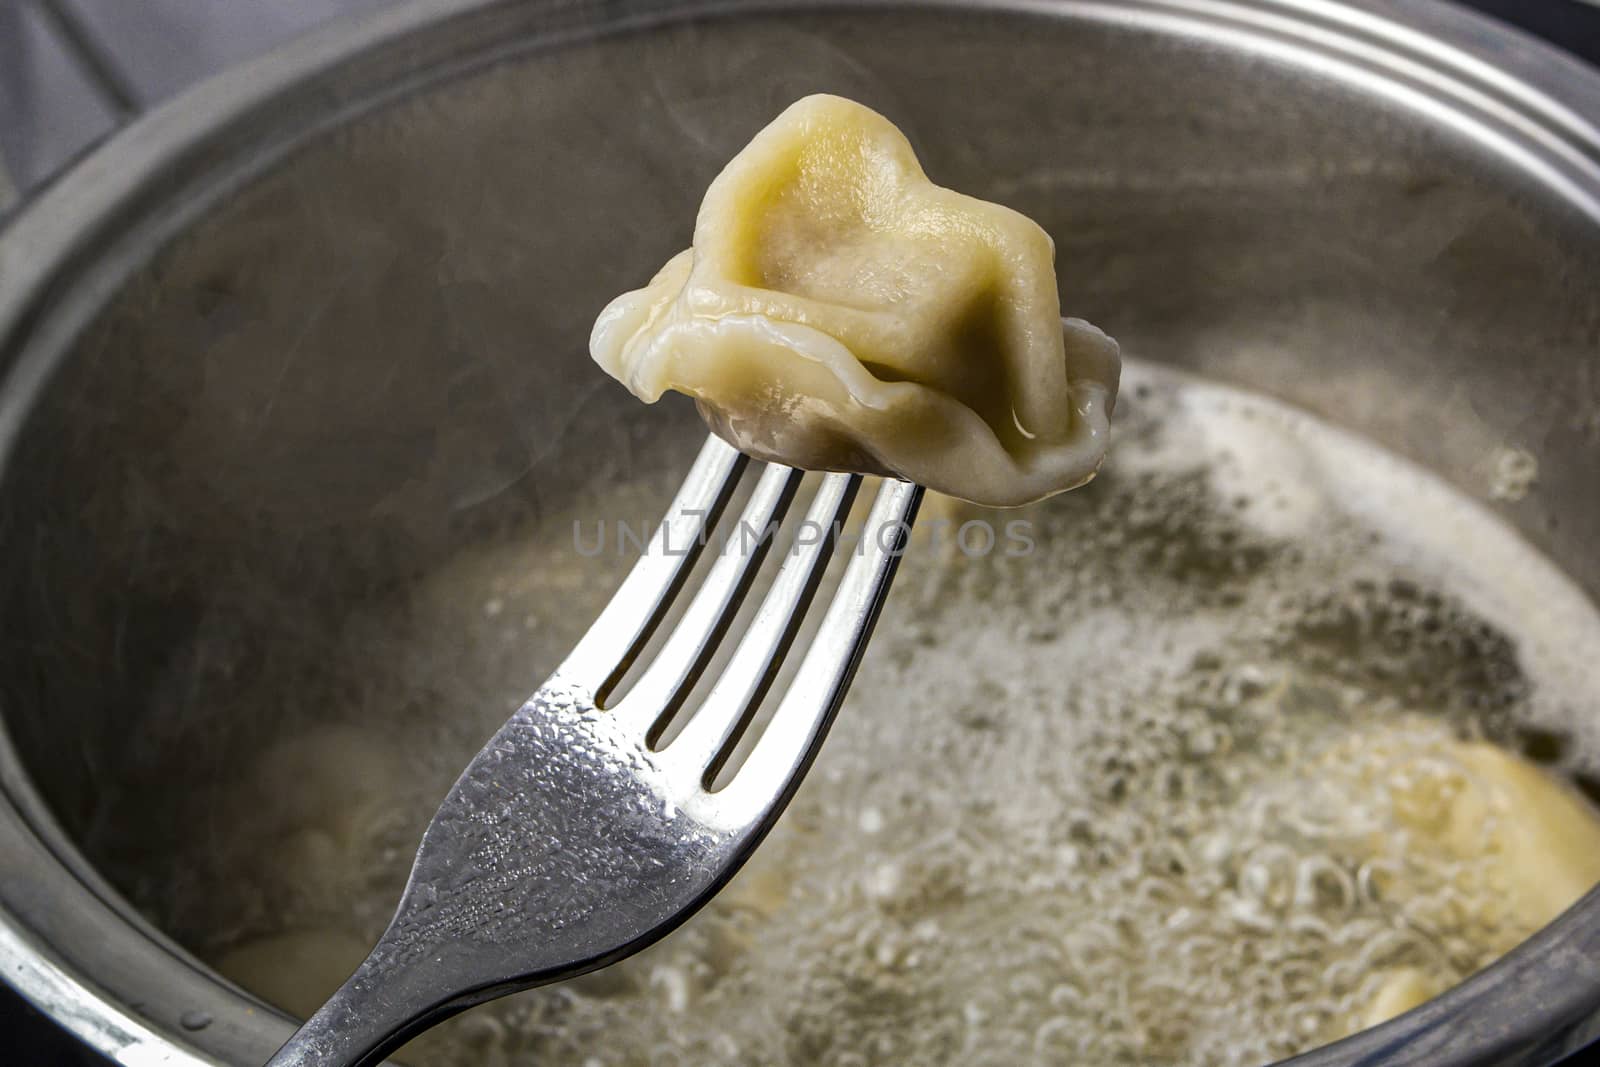 dumplings are put on a fork against the background of boiling broth by Akmenra